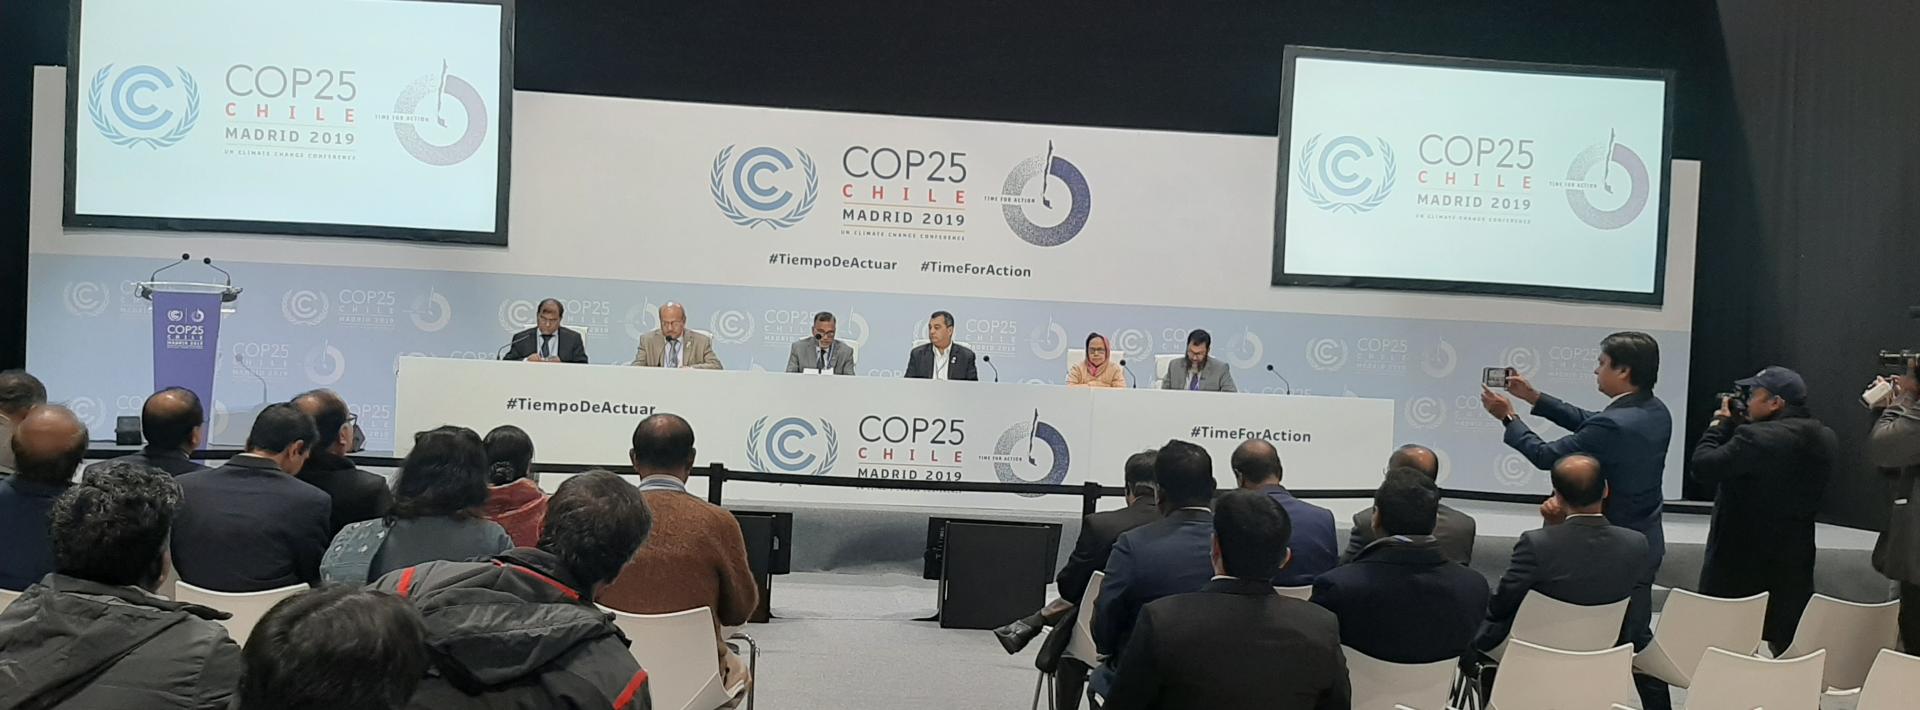 Bangladesh frustrated over the talks in COP25, as per the Press Conference